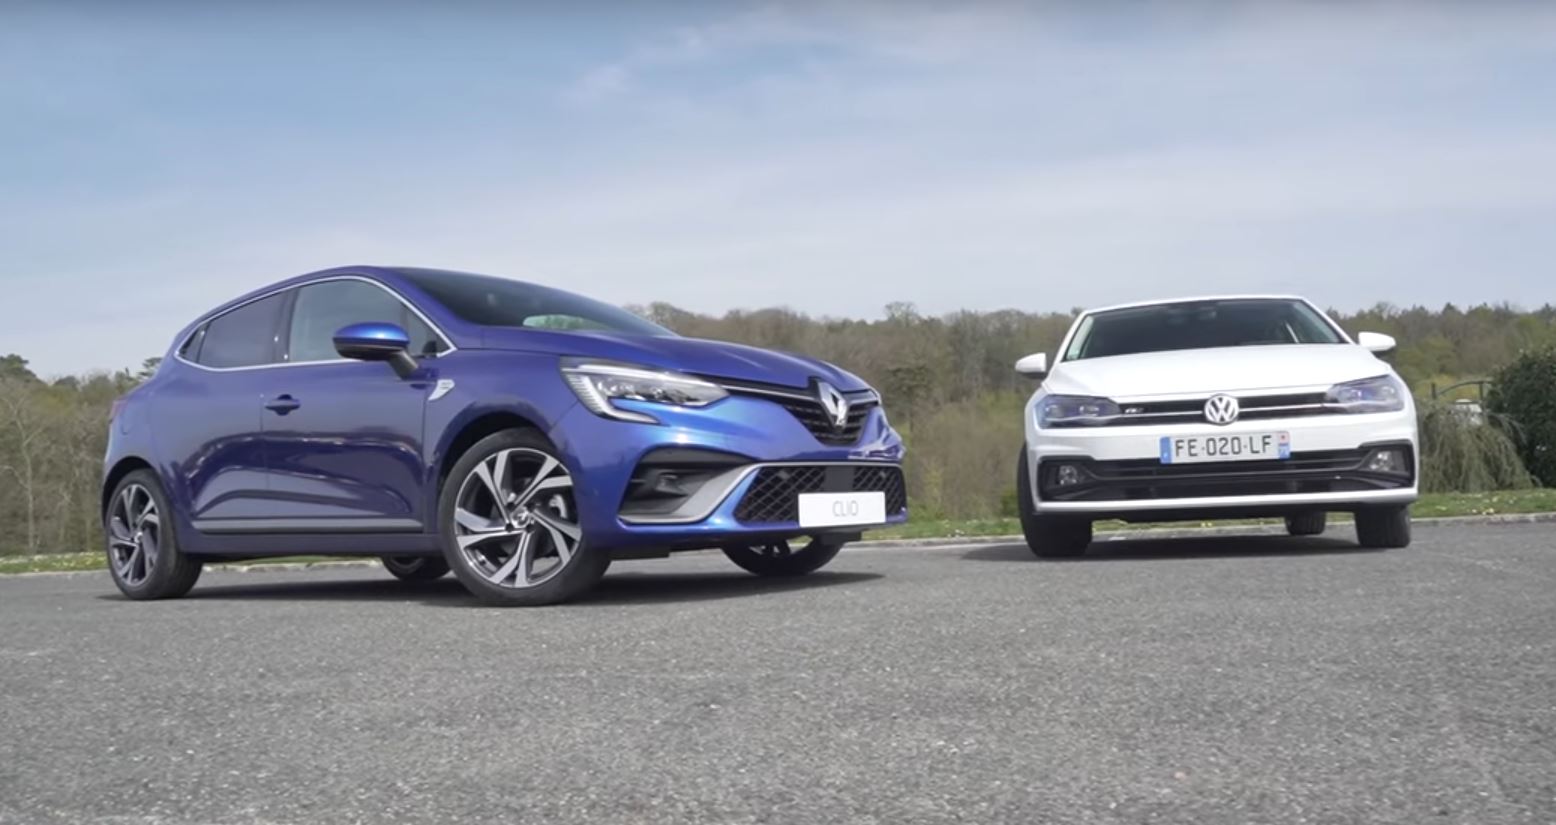 https://s1.cdn.autoevolution.com/images/news/gallery/2020-renault-clio-takes-on-vw-polo-in-french-reviews_1.jpg